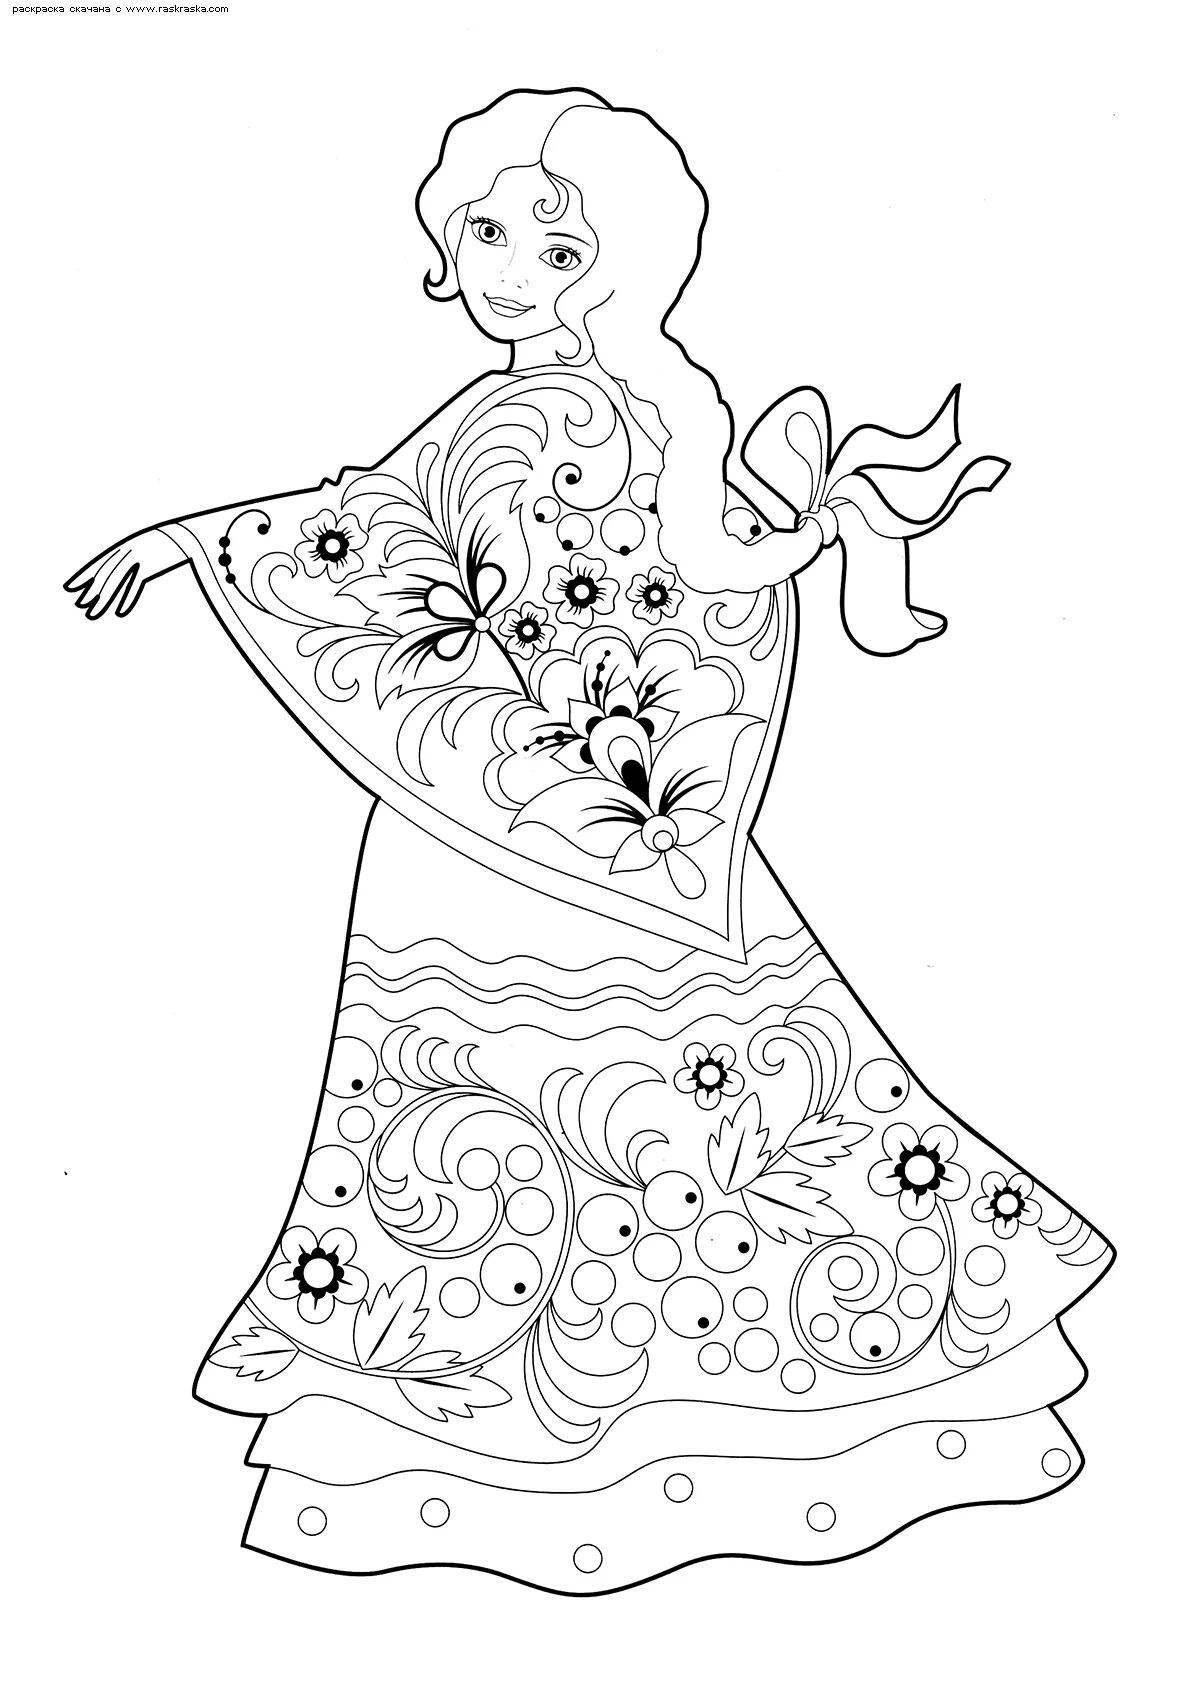 Amazing Russian beauty coloring book